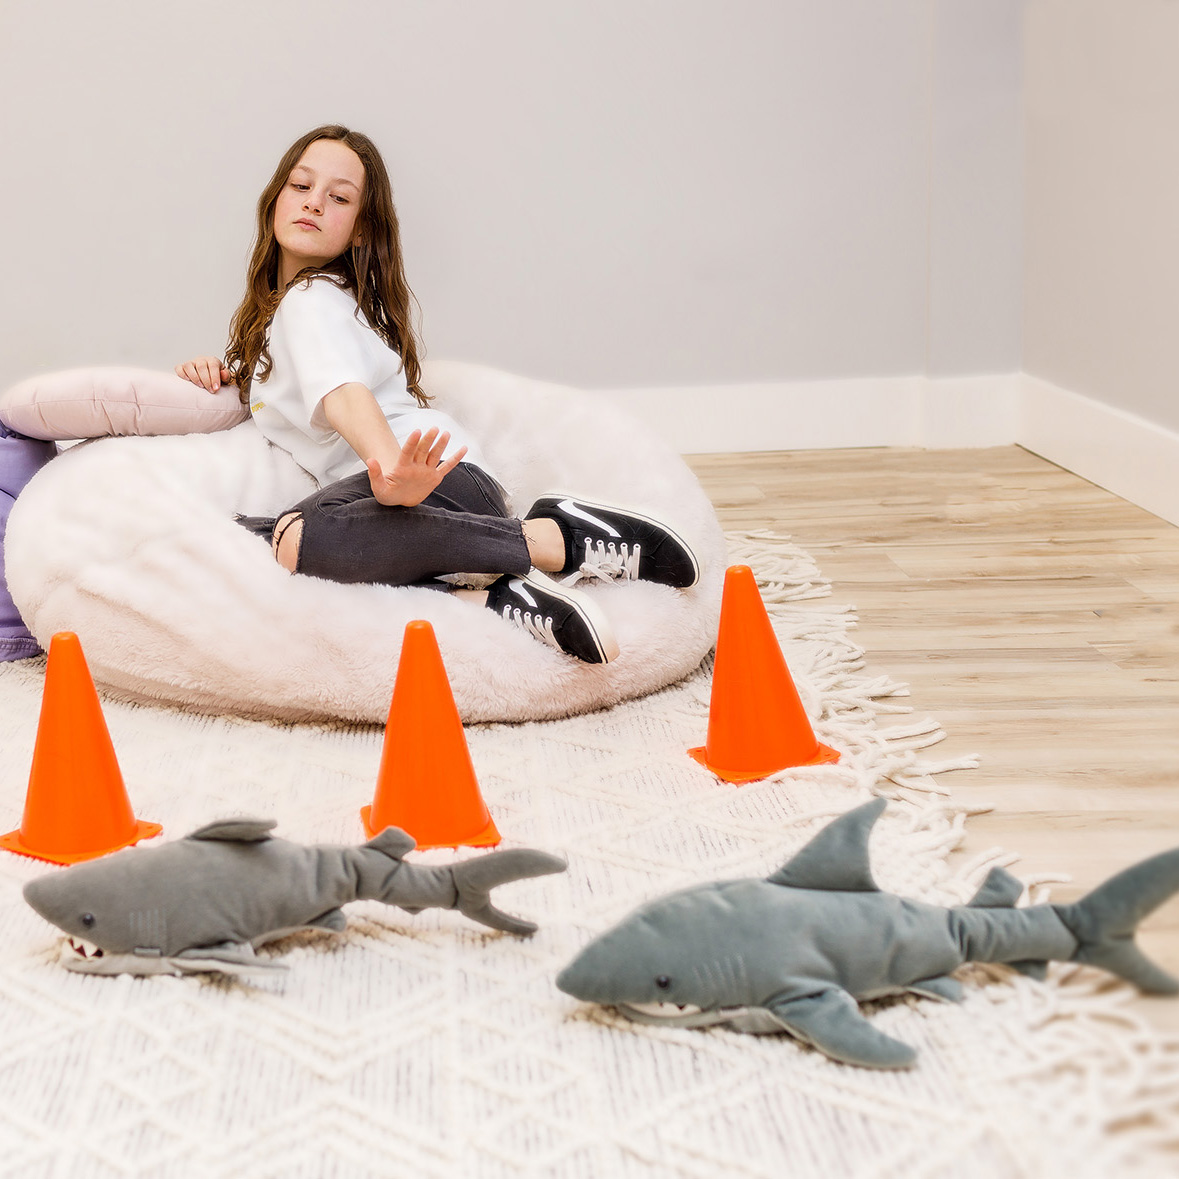 A girl, seated on a pink pouffy cushion, holds her hand as a barrier. Toy traffic cones surround her, while two toy stuffy sharks swim around the play therapy rug.